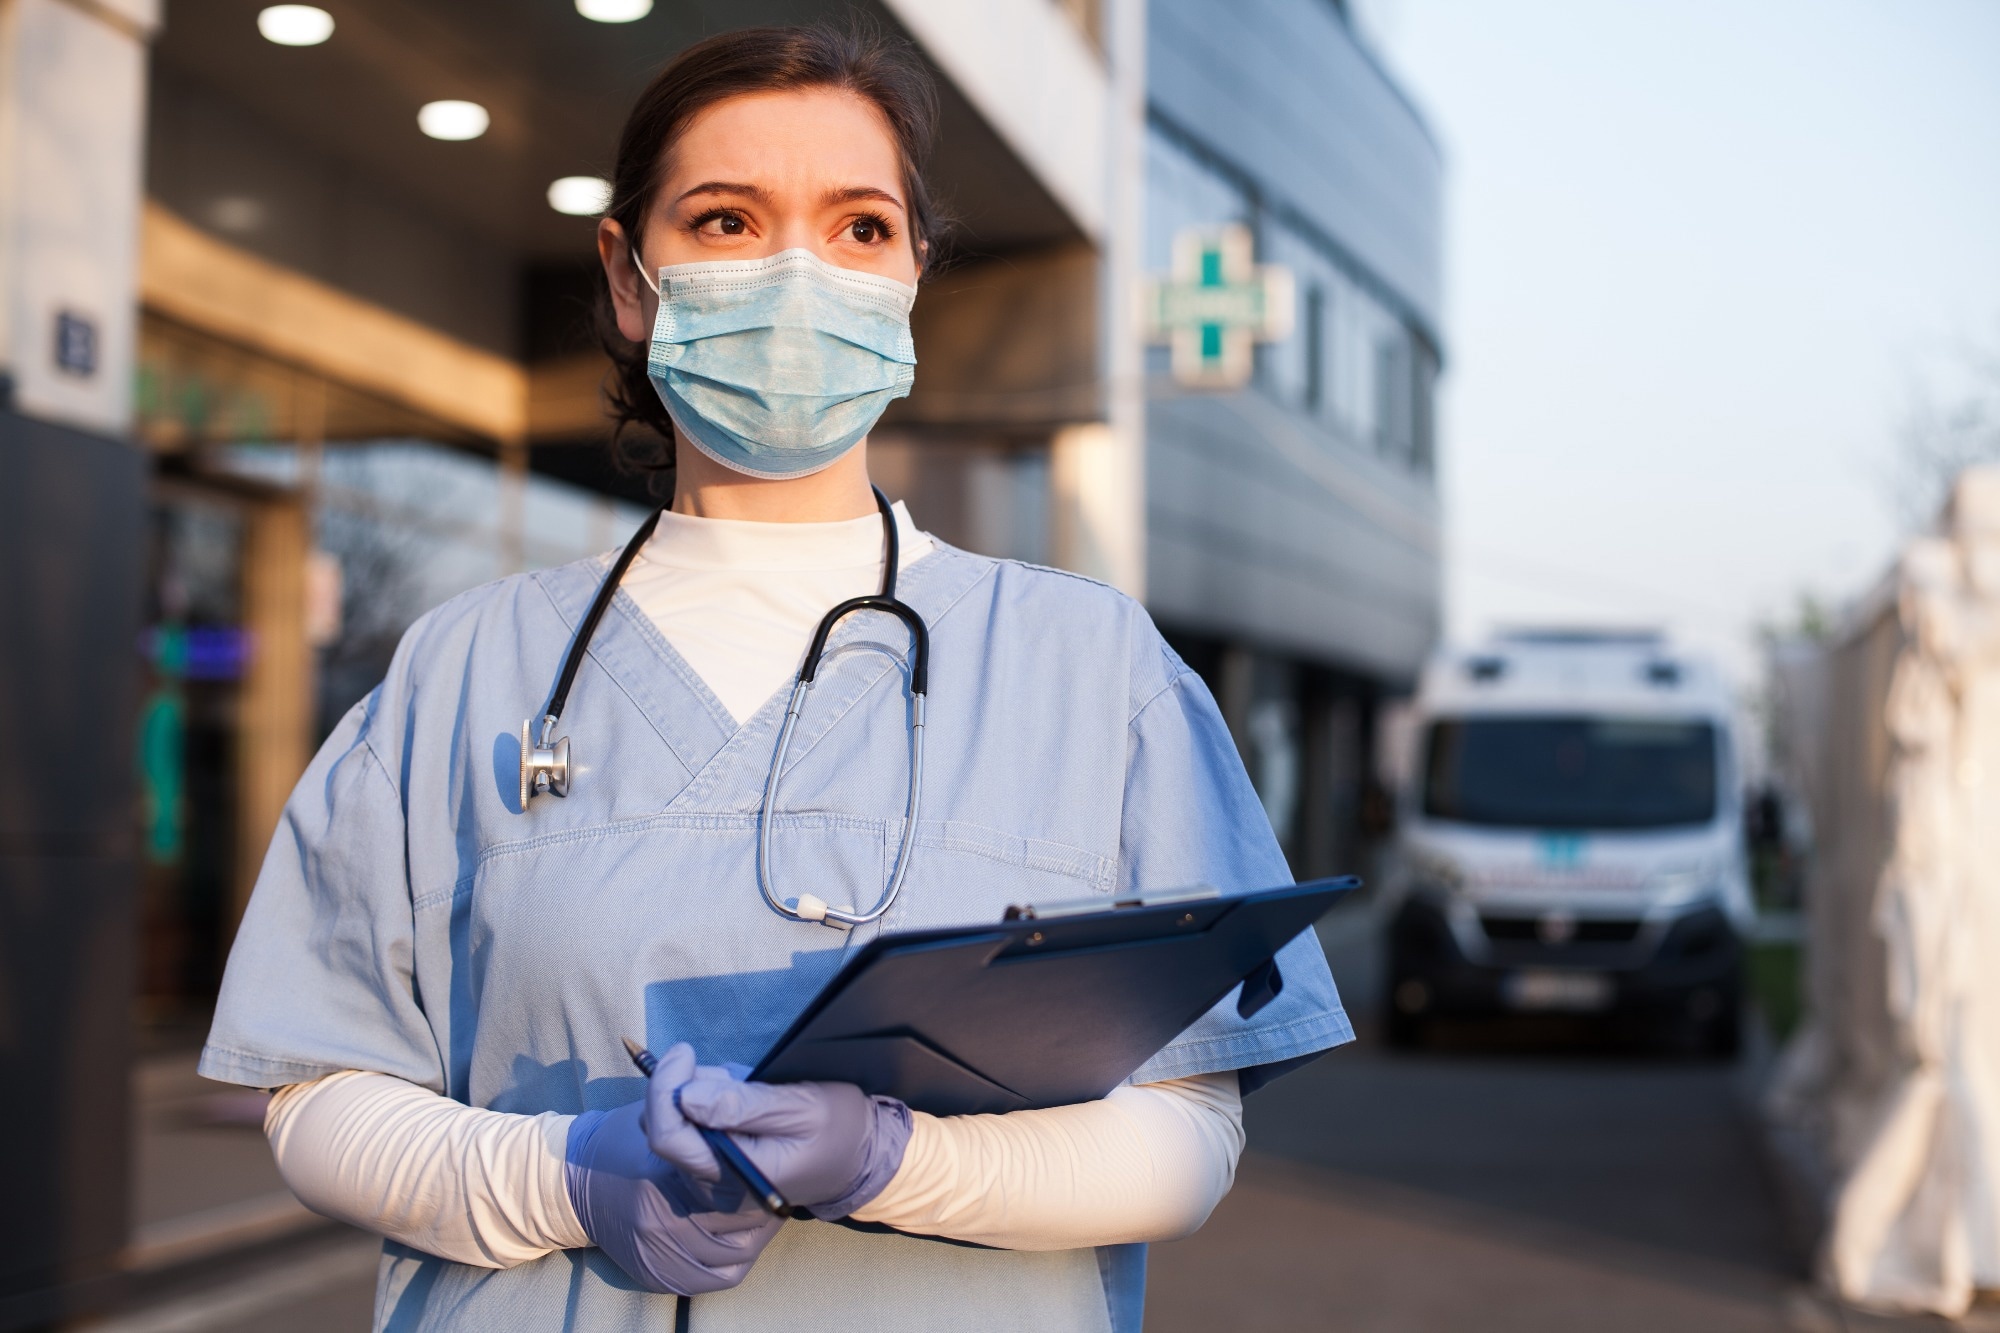 Study: Physical and Stressful Psychological Impacts of COVID-19 on Healthcare Workers Due to Prolonged Personal Protective Equipment Use: A Cross-Sectional Survey Study. Image Credit: Cryptographer/Shutterstock